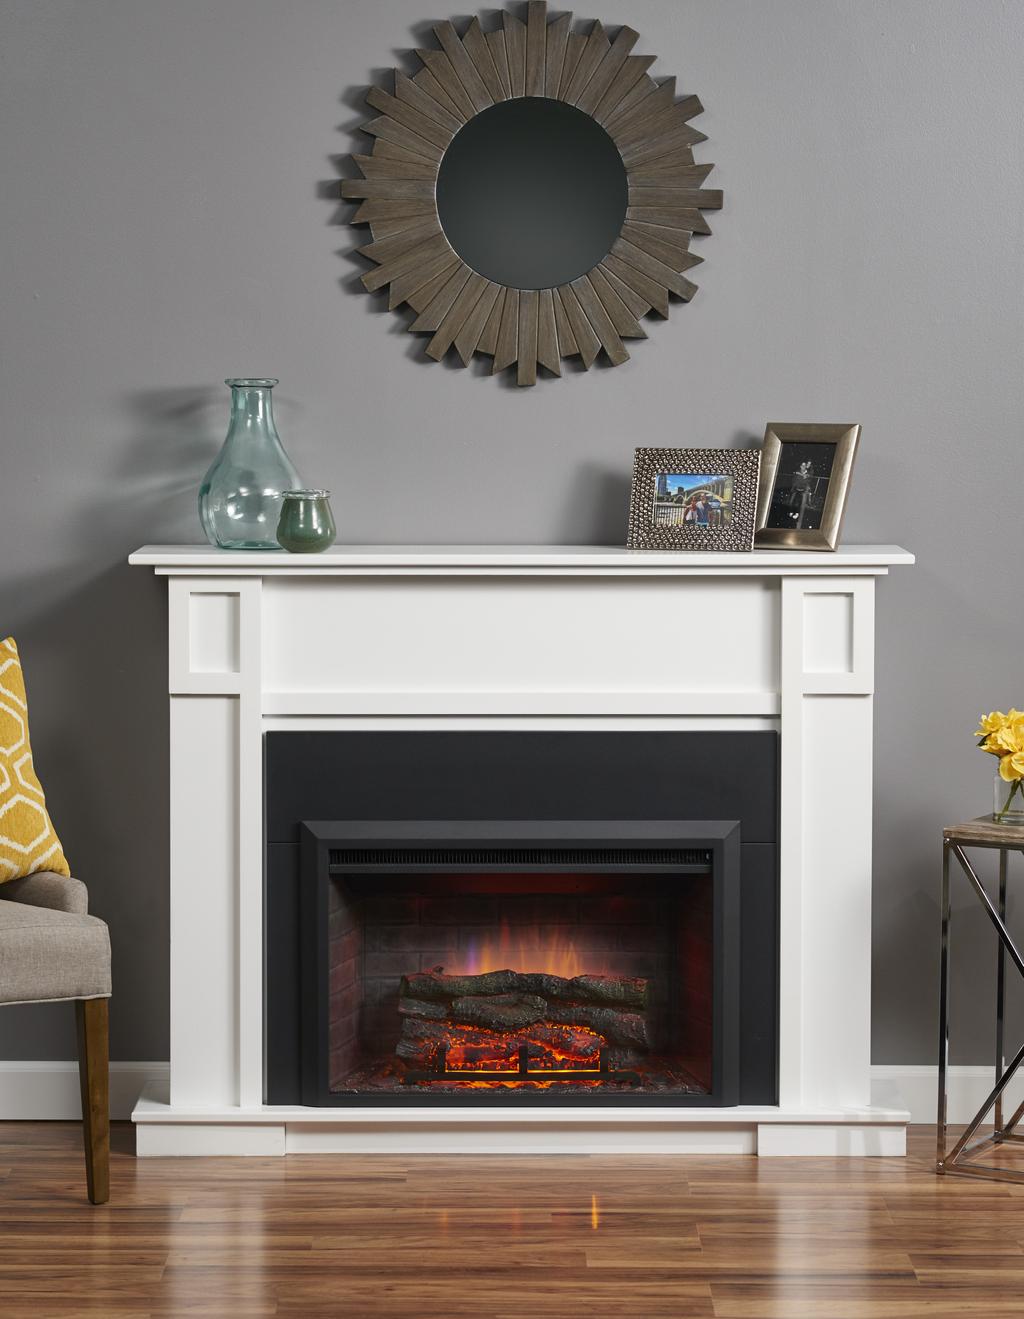 gallery collection indoor fireplaces & accesories Just plug in one of our electric fireplaces for instant ambiance in any room.